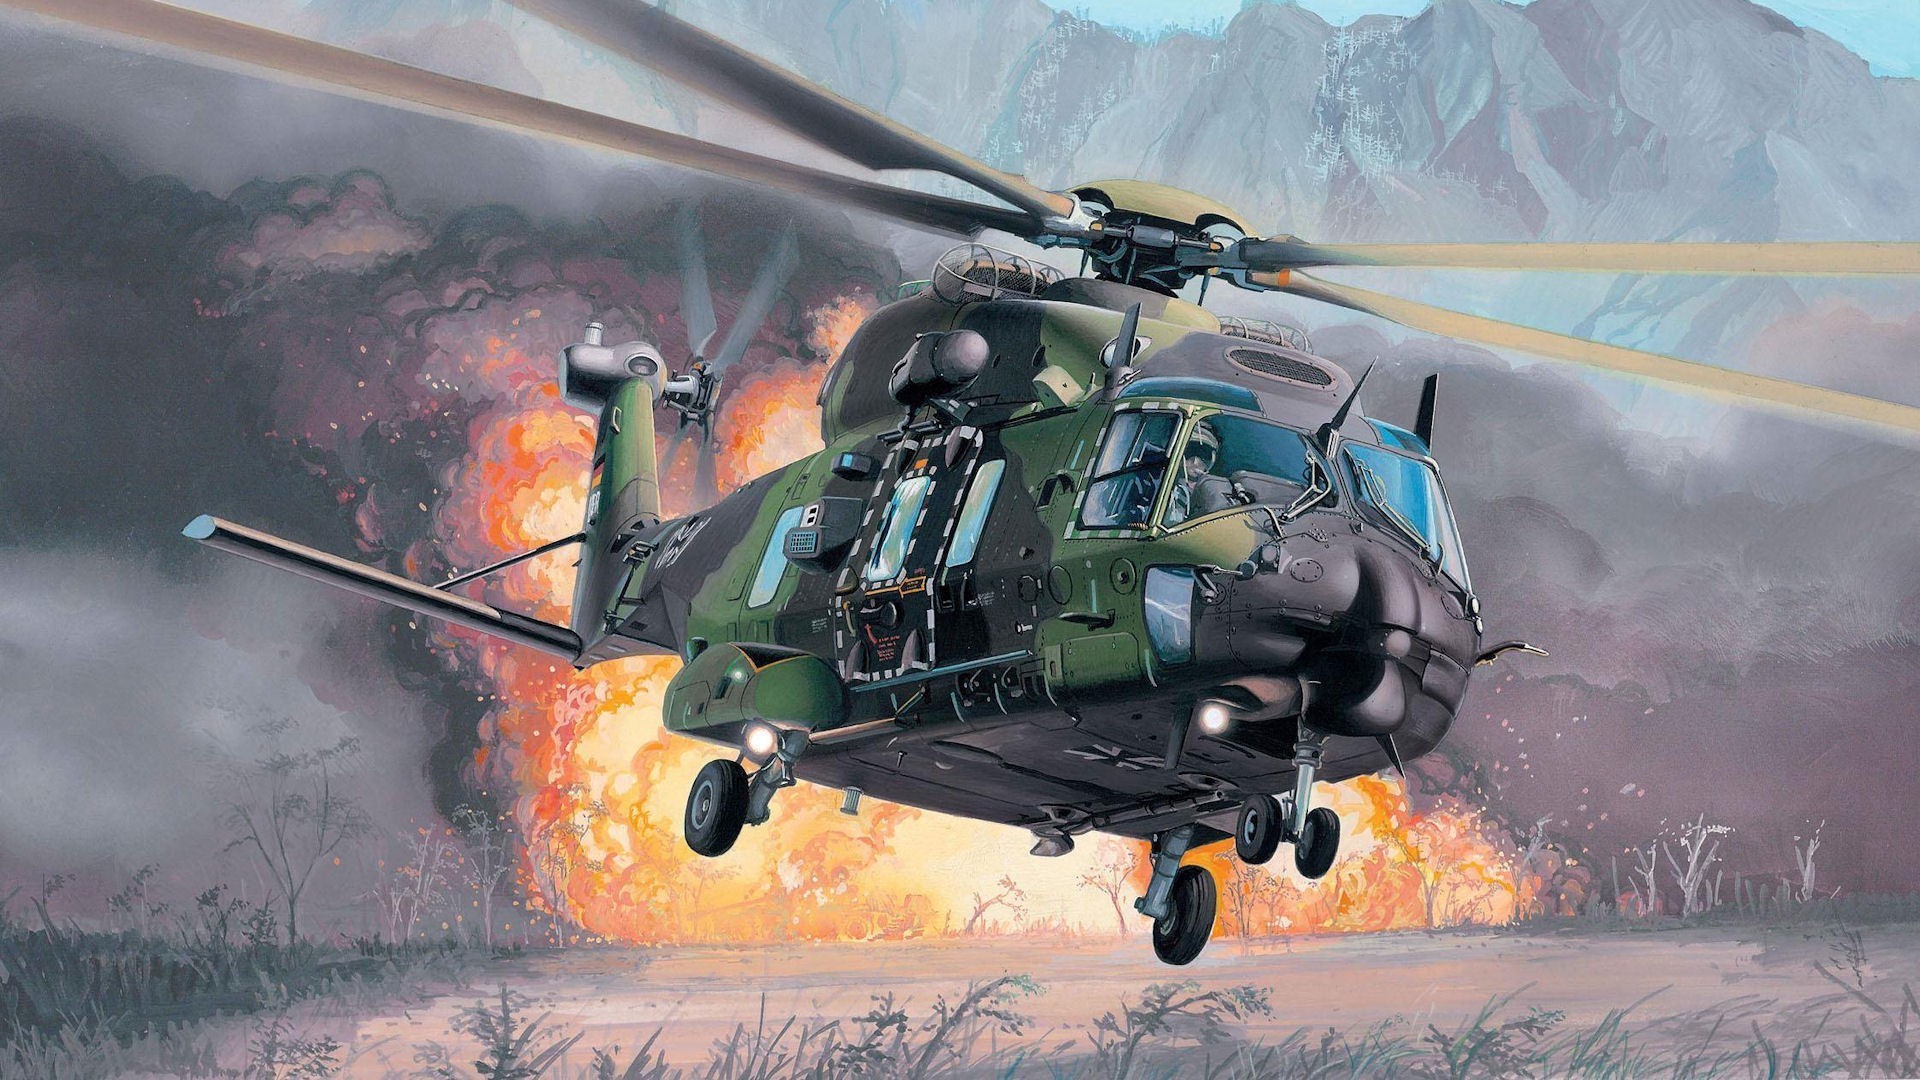 1920x1080 14 best Helicopters images on Pinterest | Military aircraft ... Army  Wallpapers ...